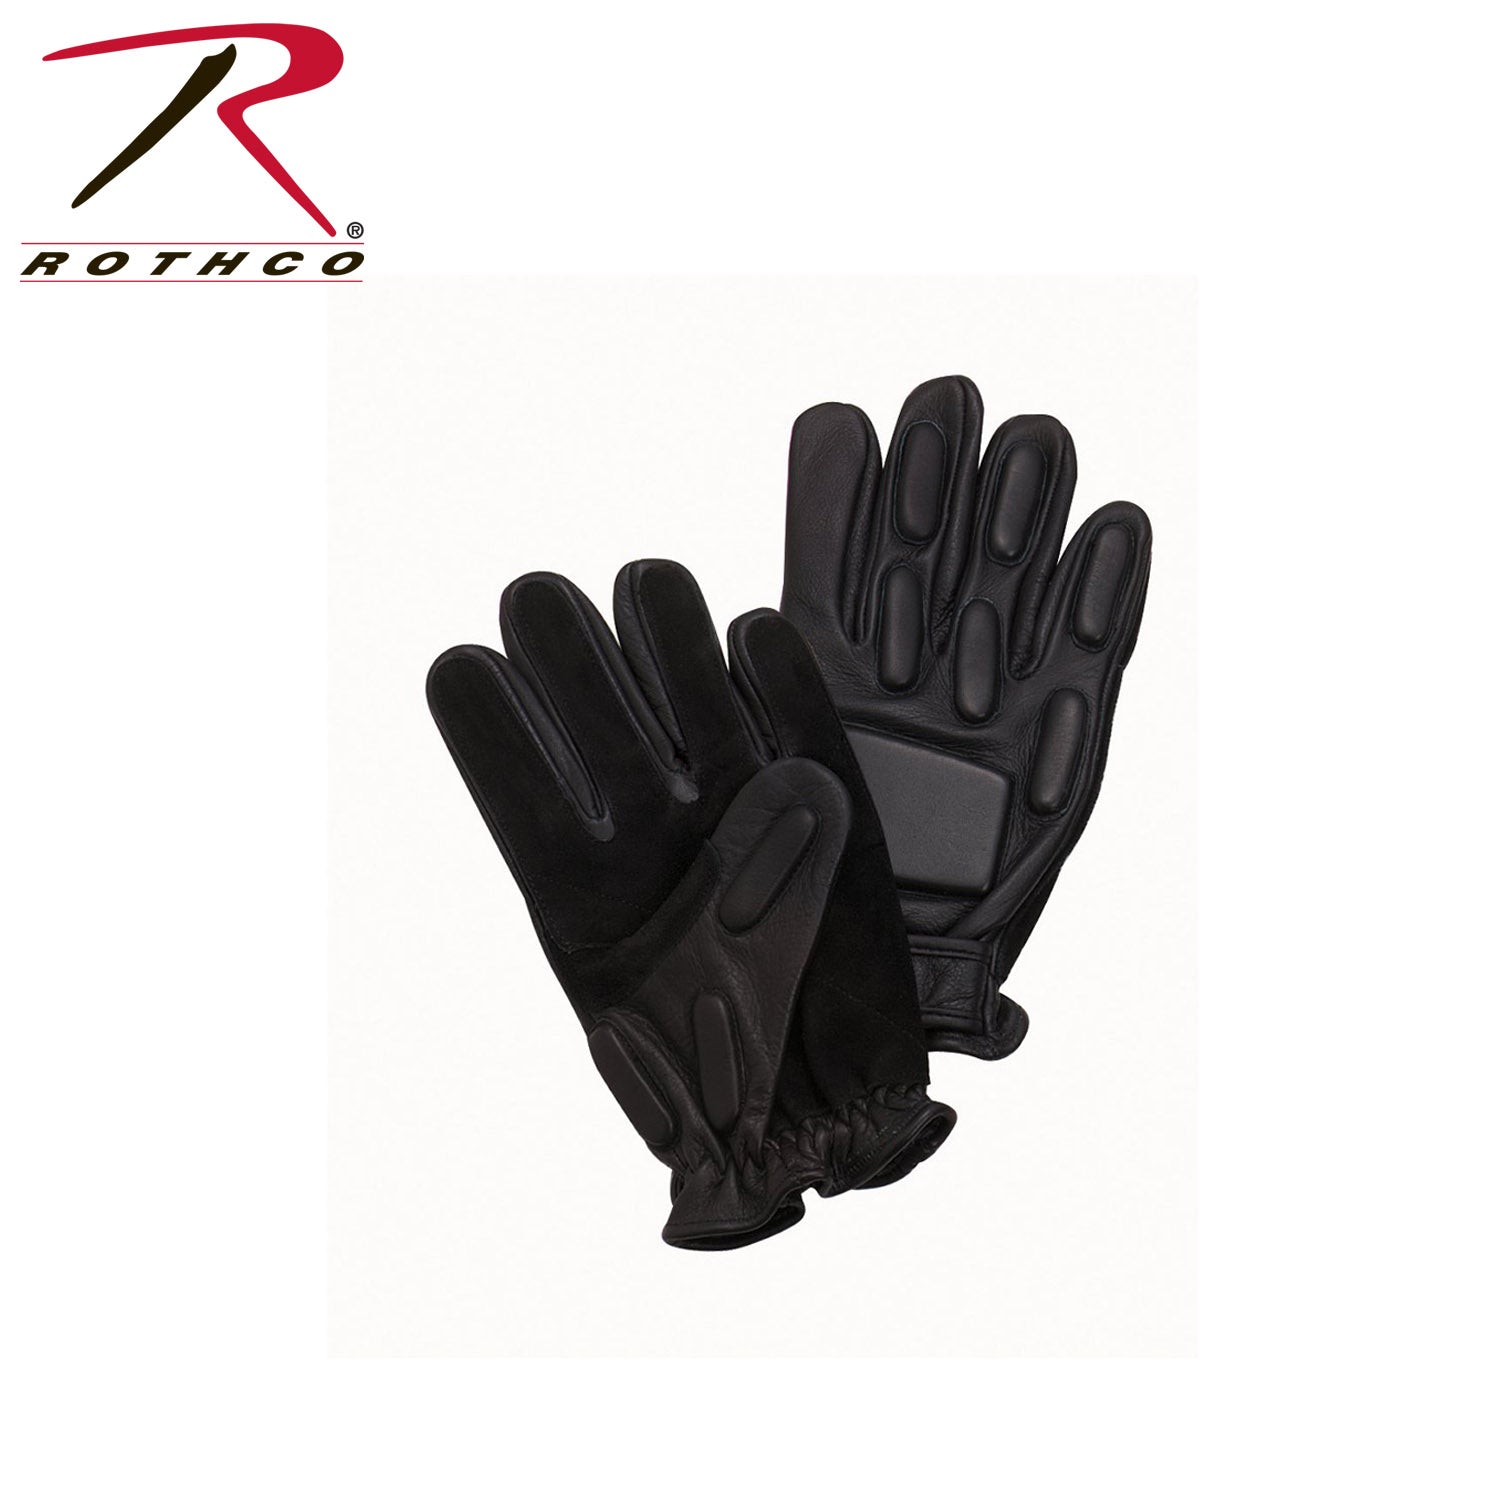 Rothco Full-Finger Rappelling Gloves - Tactical Choice Plus